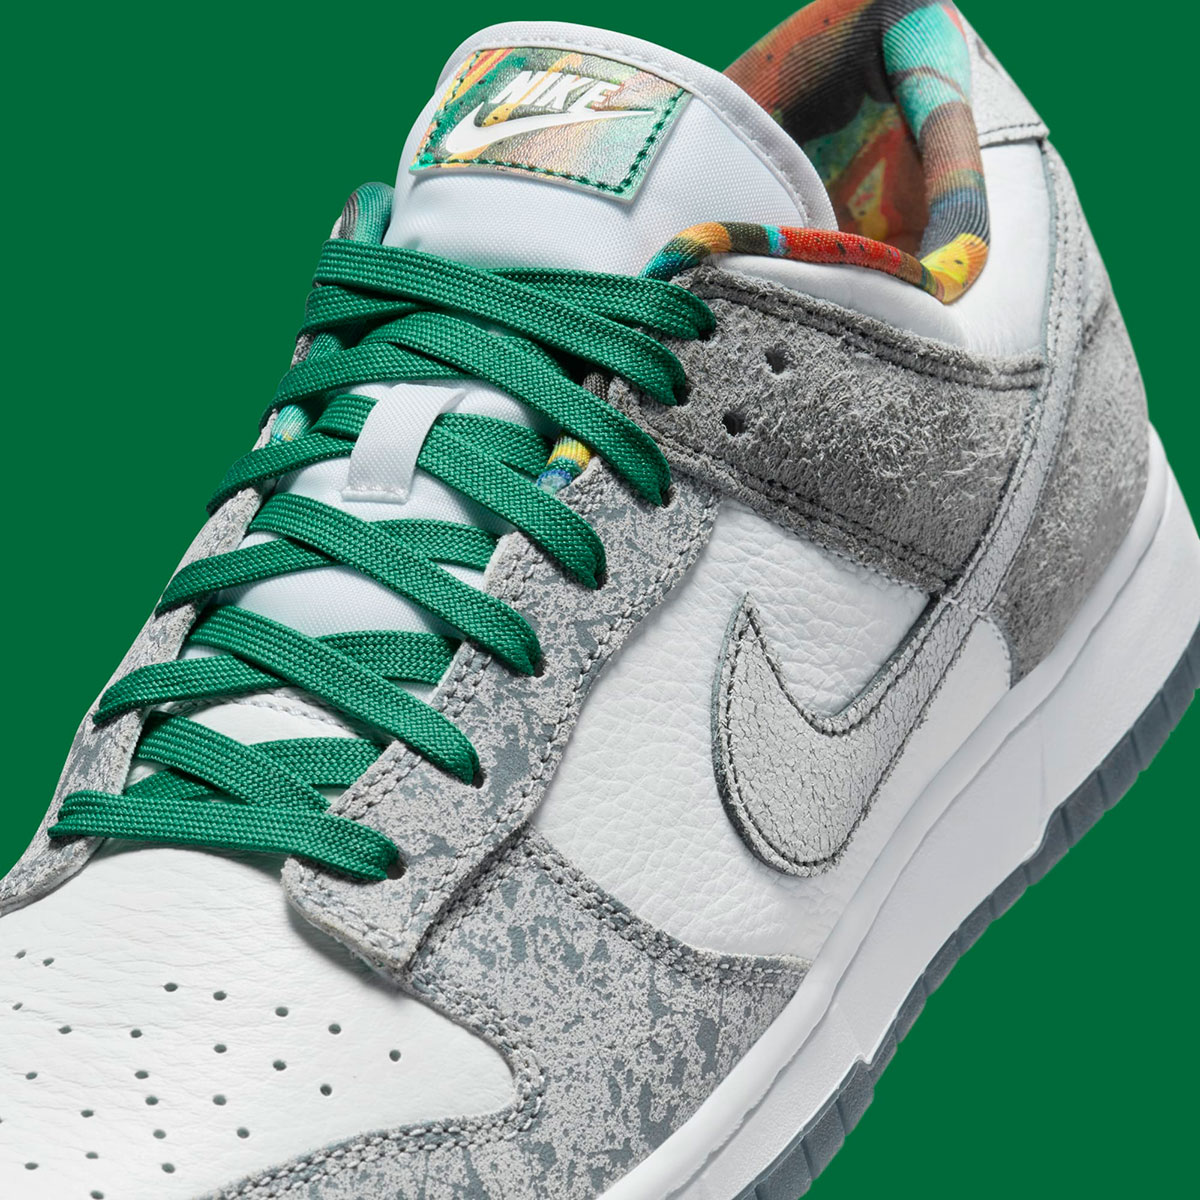 Nike Dunk Low Philly Hf4840 068 Release Date 8